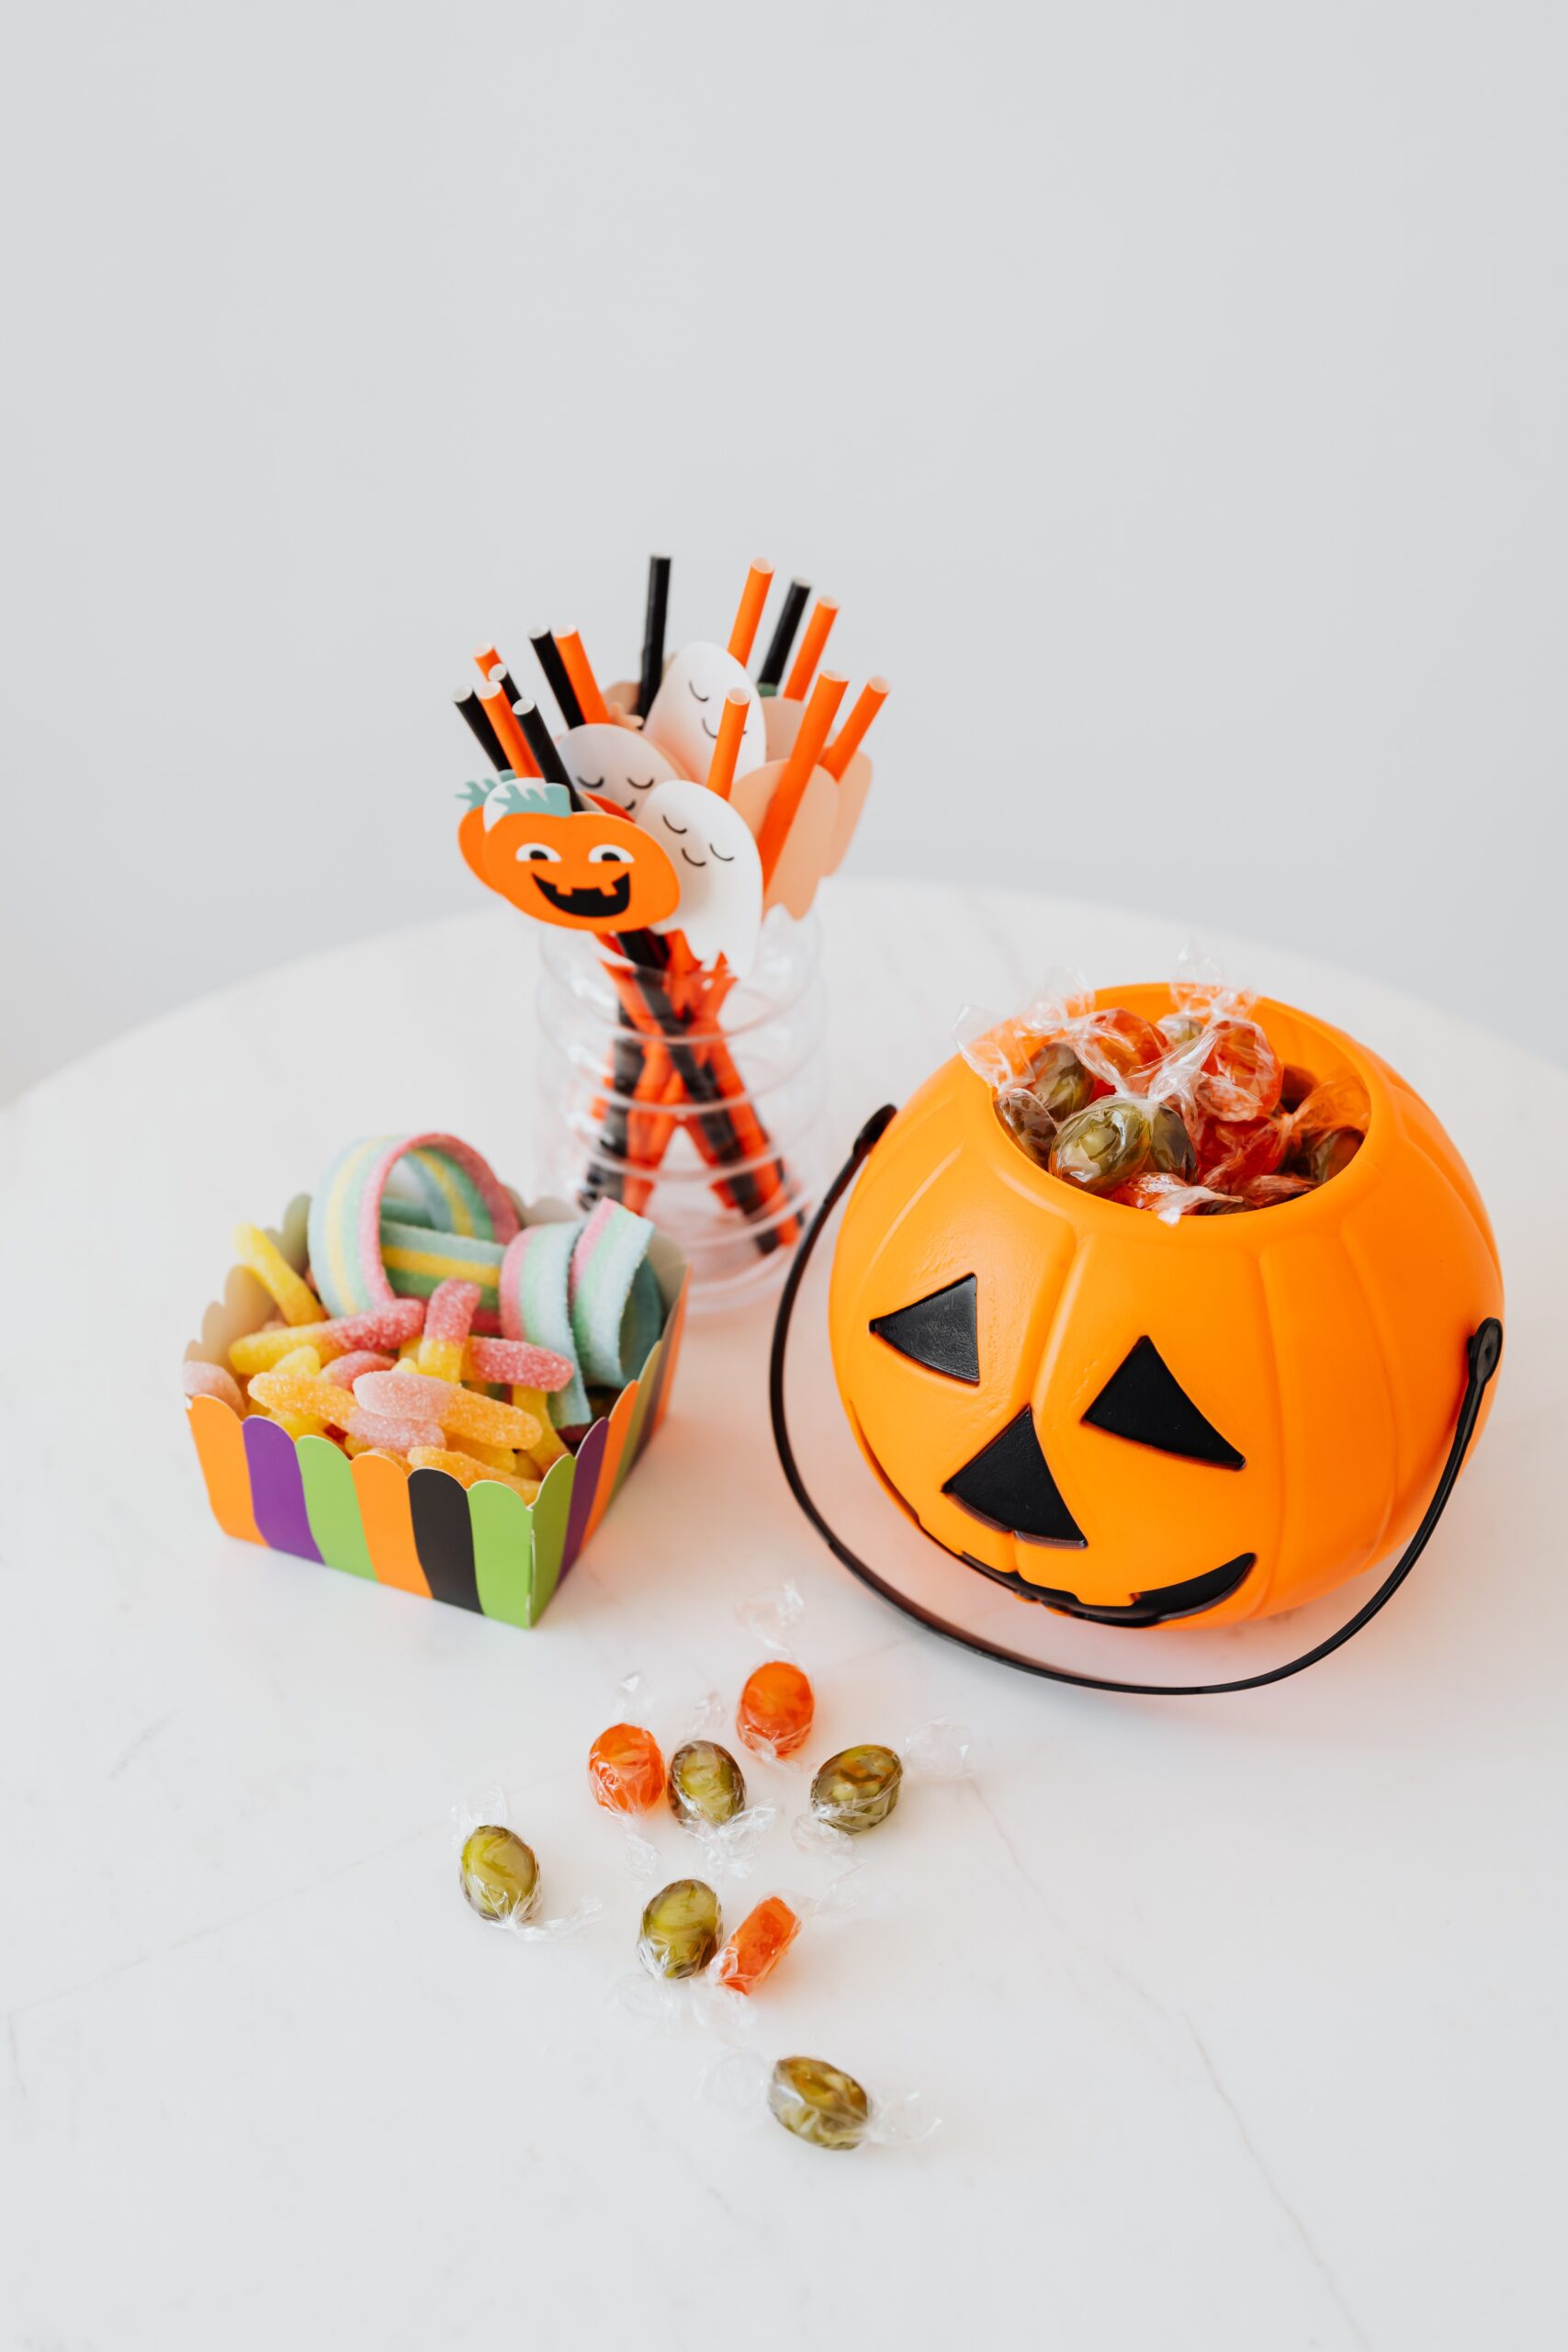 Halloween Decorations Shopping Tricks, Treats, and Trends